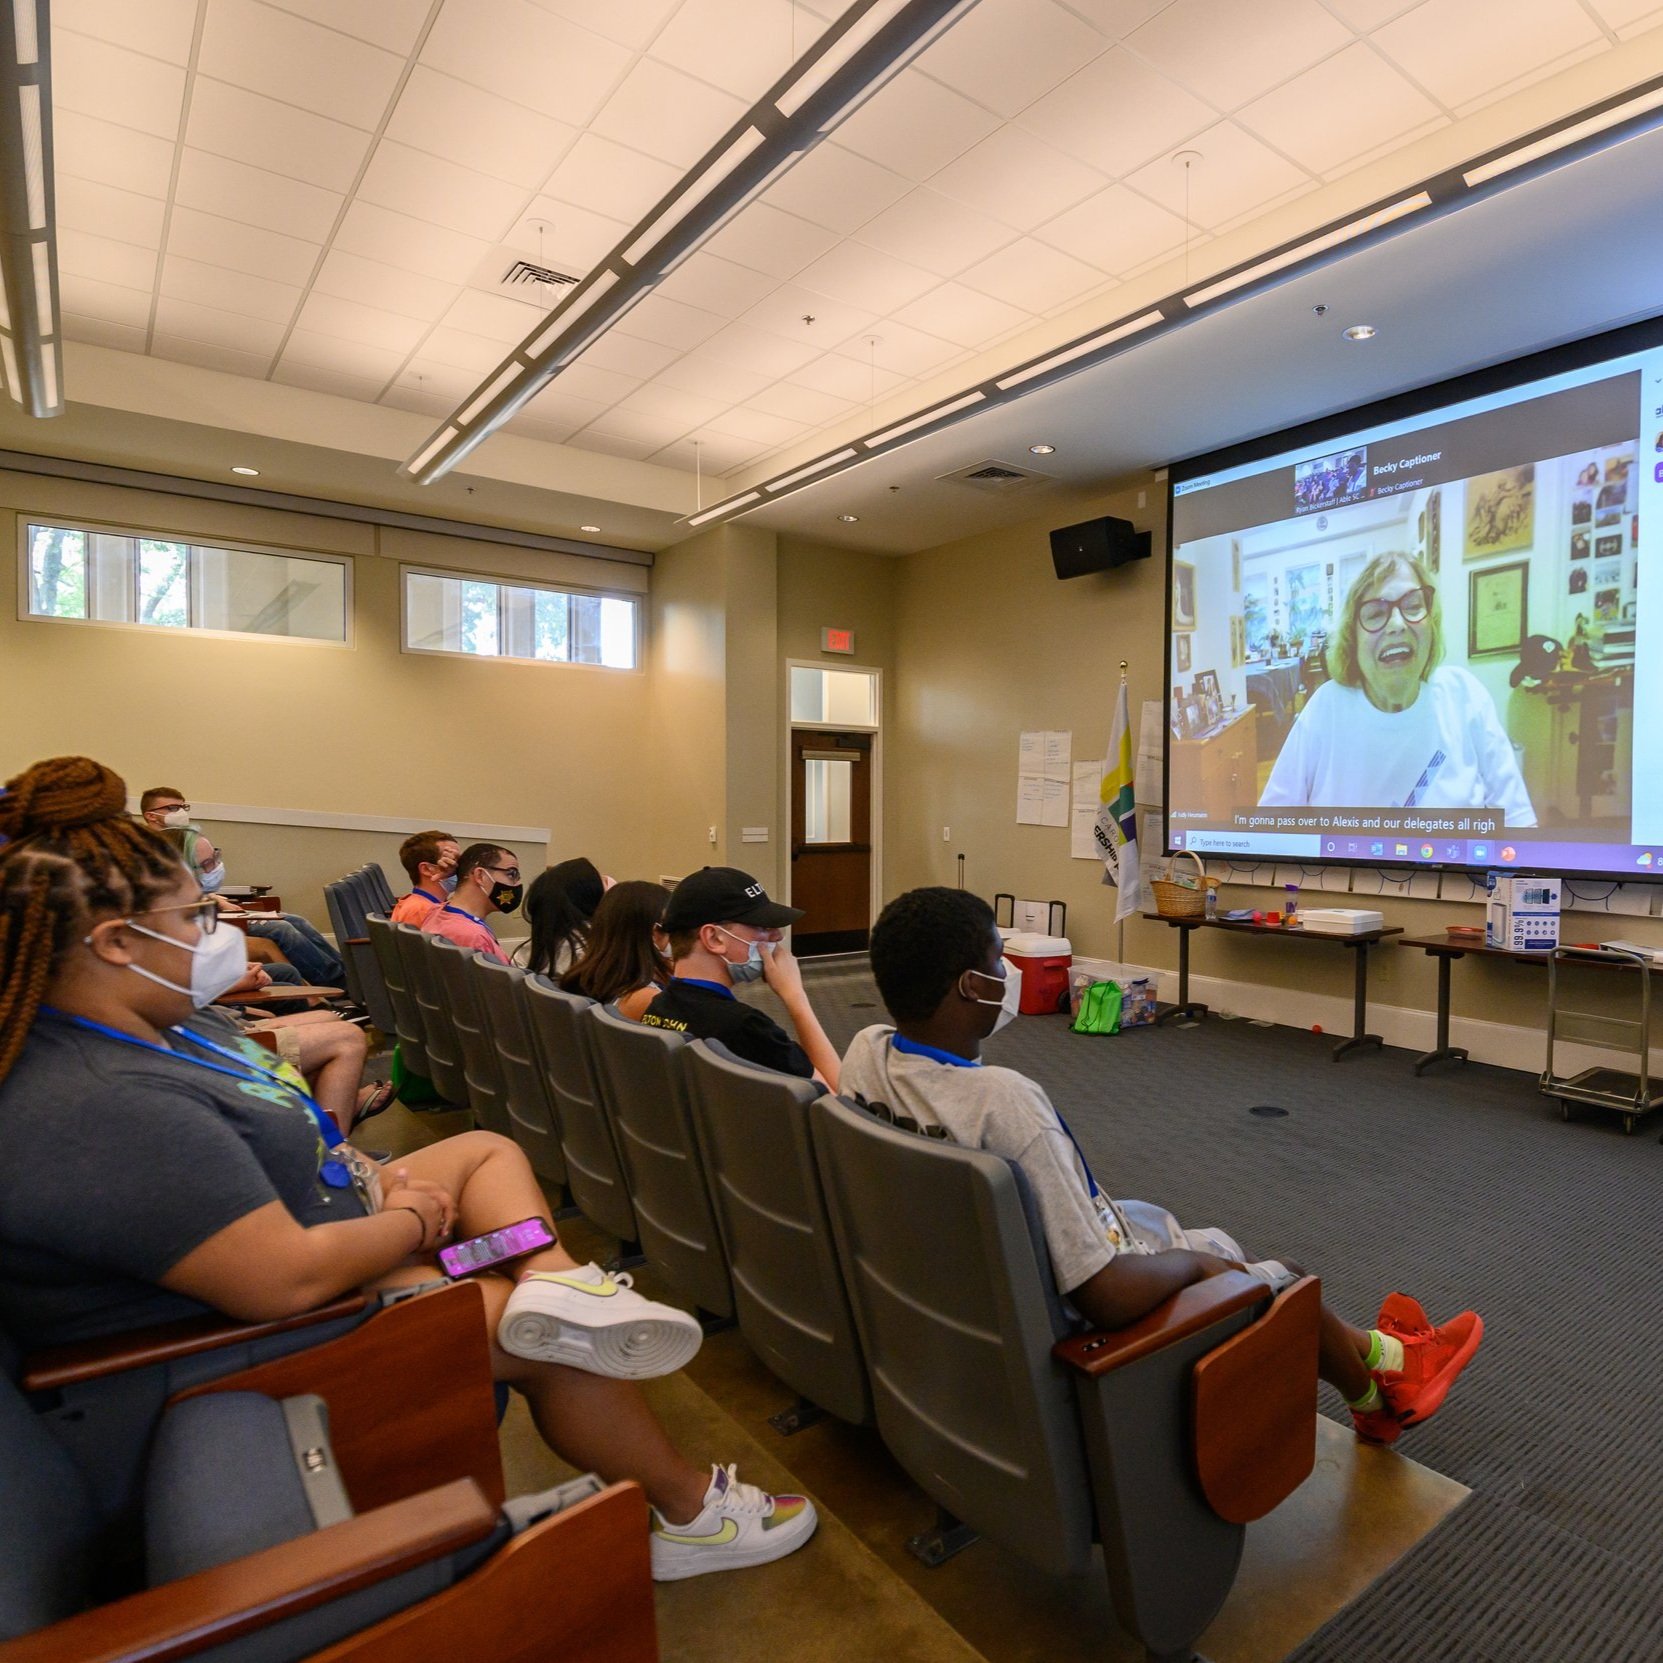 Internationally famous disability rights activist, Judy Huemann, speaks to the delegates via zoom, projected on a screen to a full classroom.